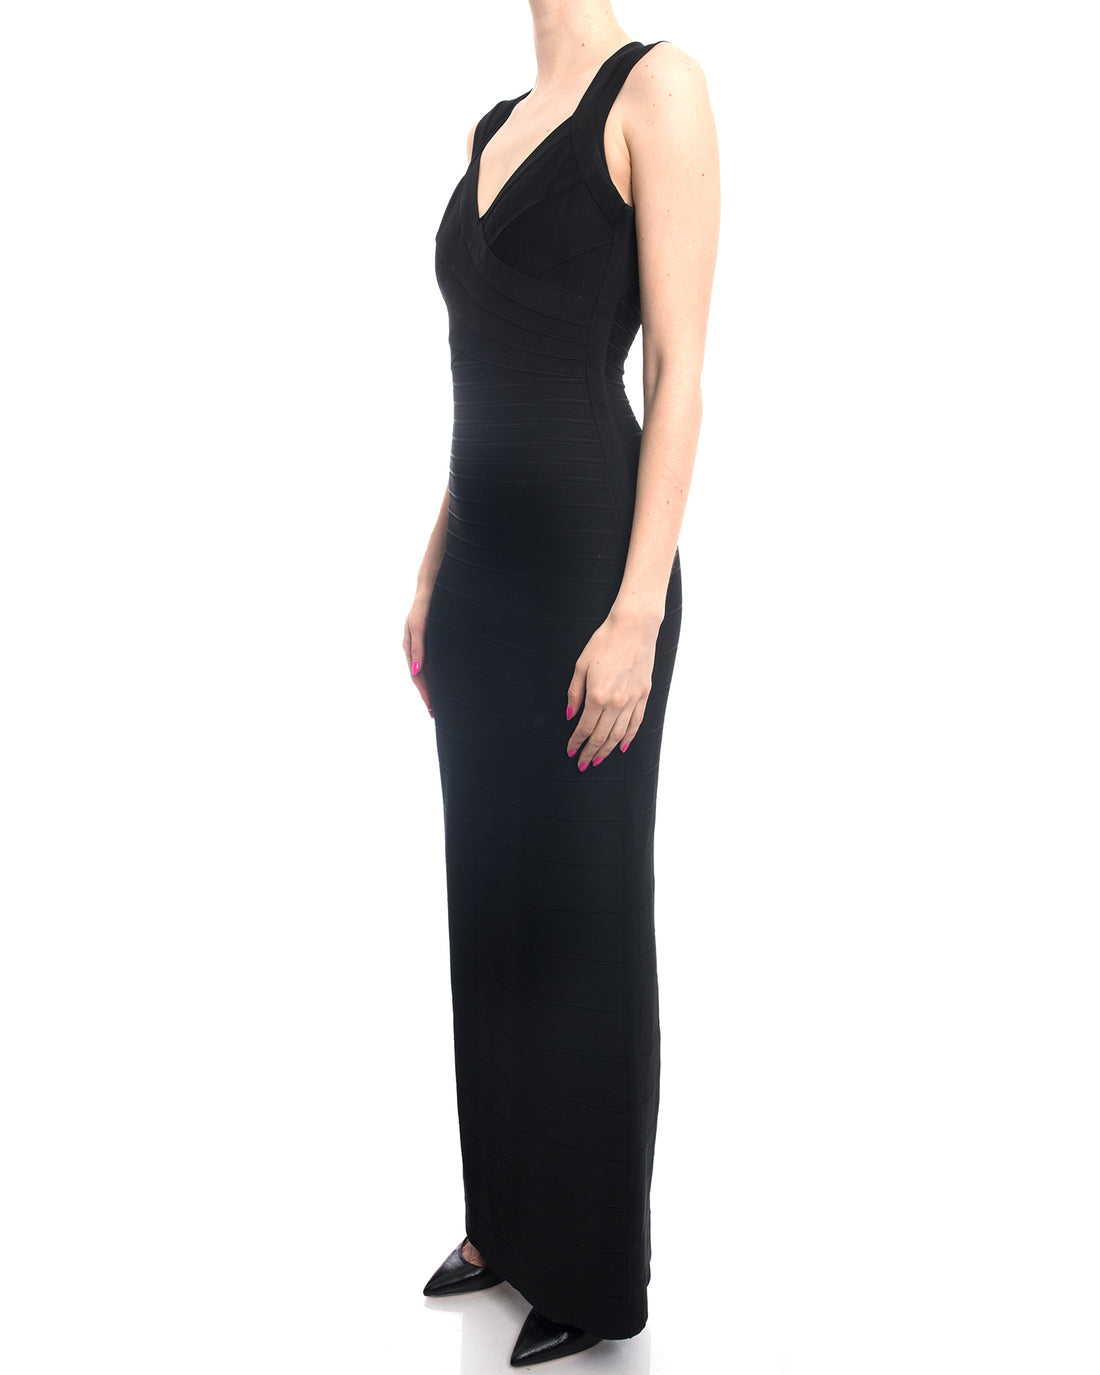 Herve Leger Black Bodycon Bandage Long Evening Gown - M – I MISS YOU ...